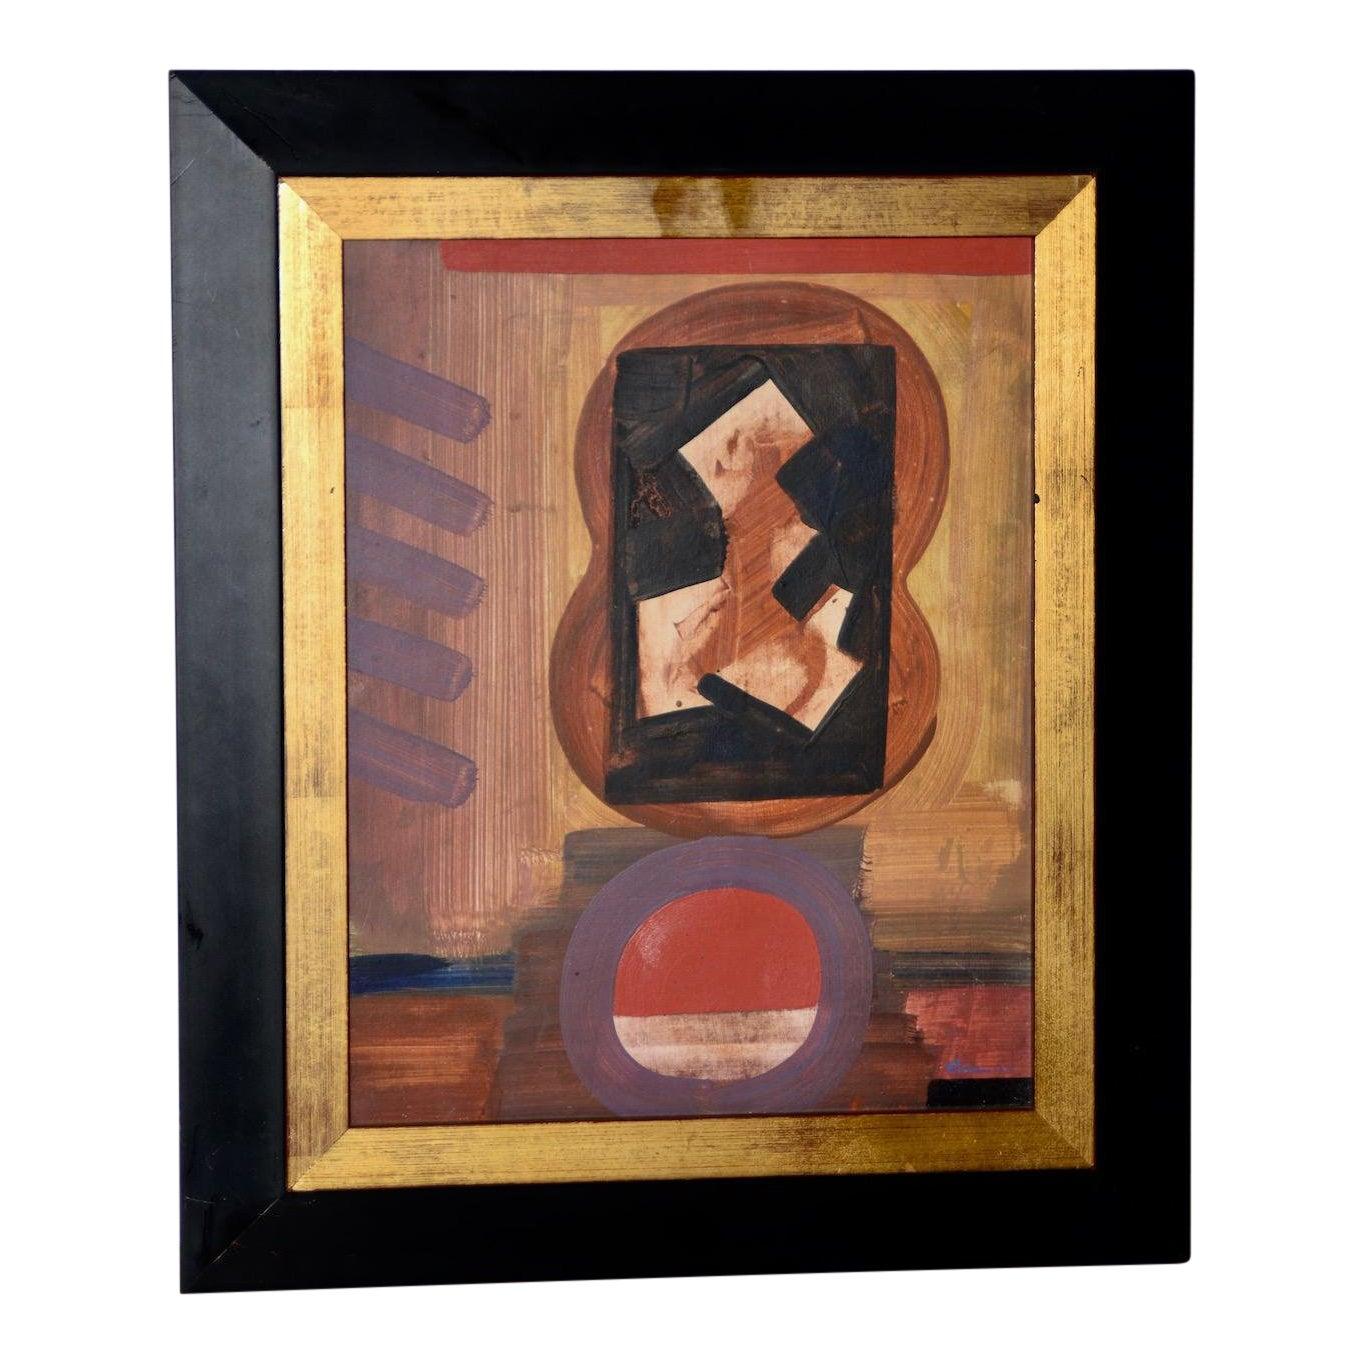 Vintage abstract painting by Erle Loran (1905 - 1999), c.1964. 

This is another fantastic period abstract painting by listed artist, Erle Loran. The untitled work is done in oil on board. The painting is in very good vintage condition. Signed and